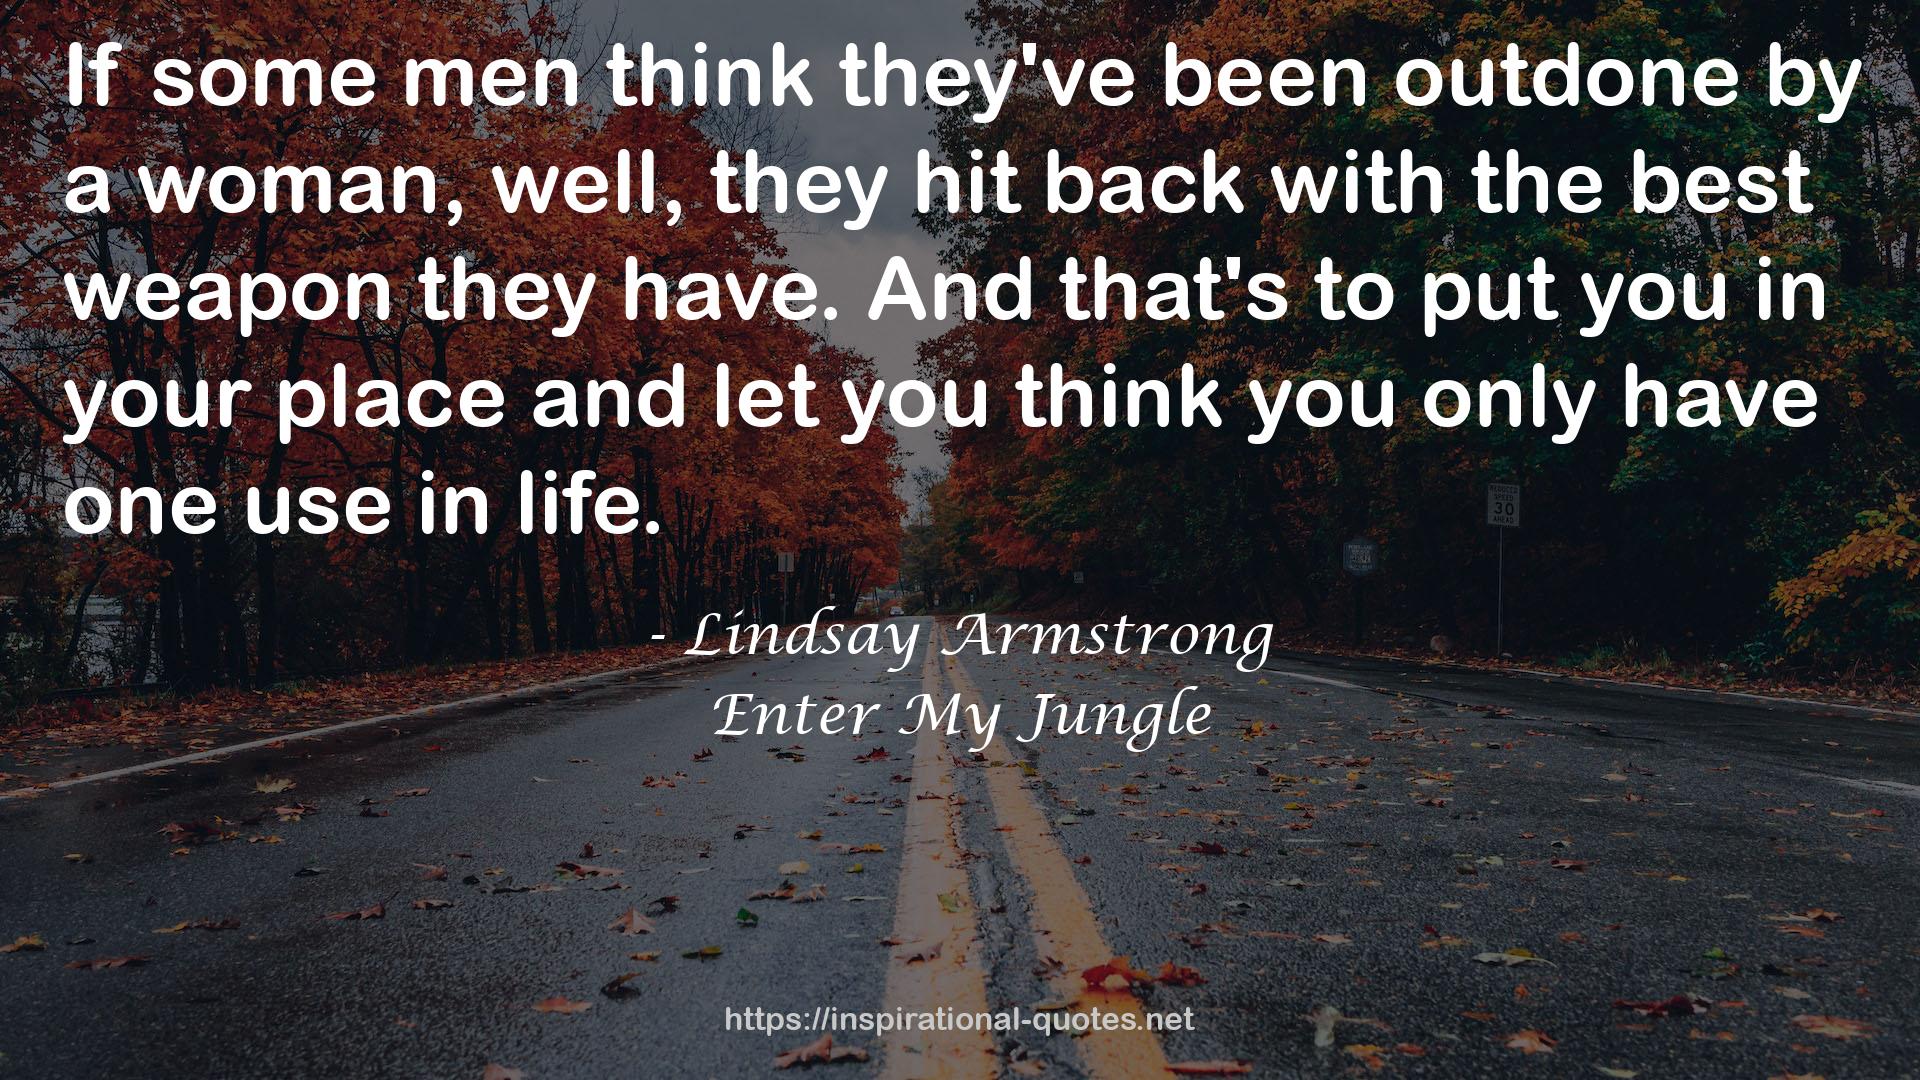 Lindsay Armstrong QUOTES